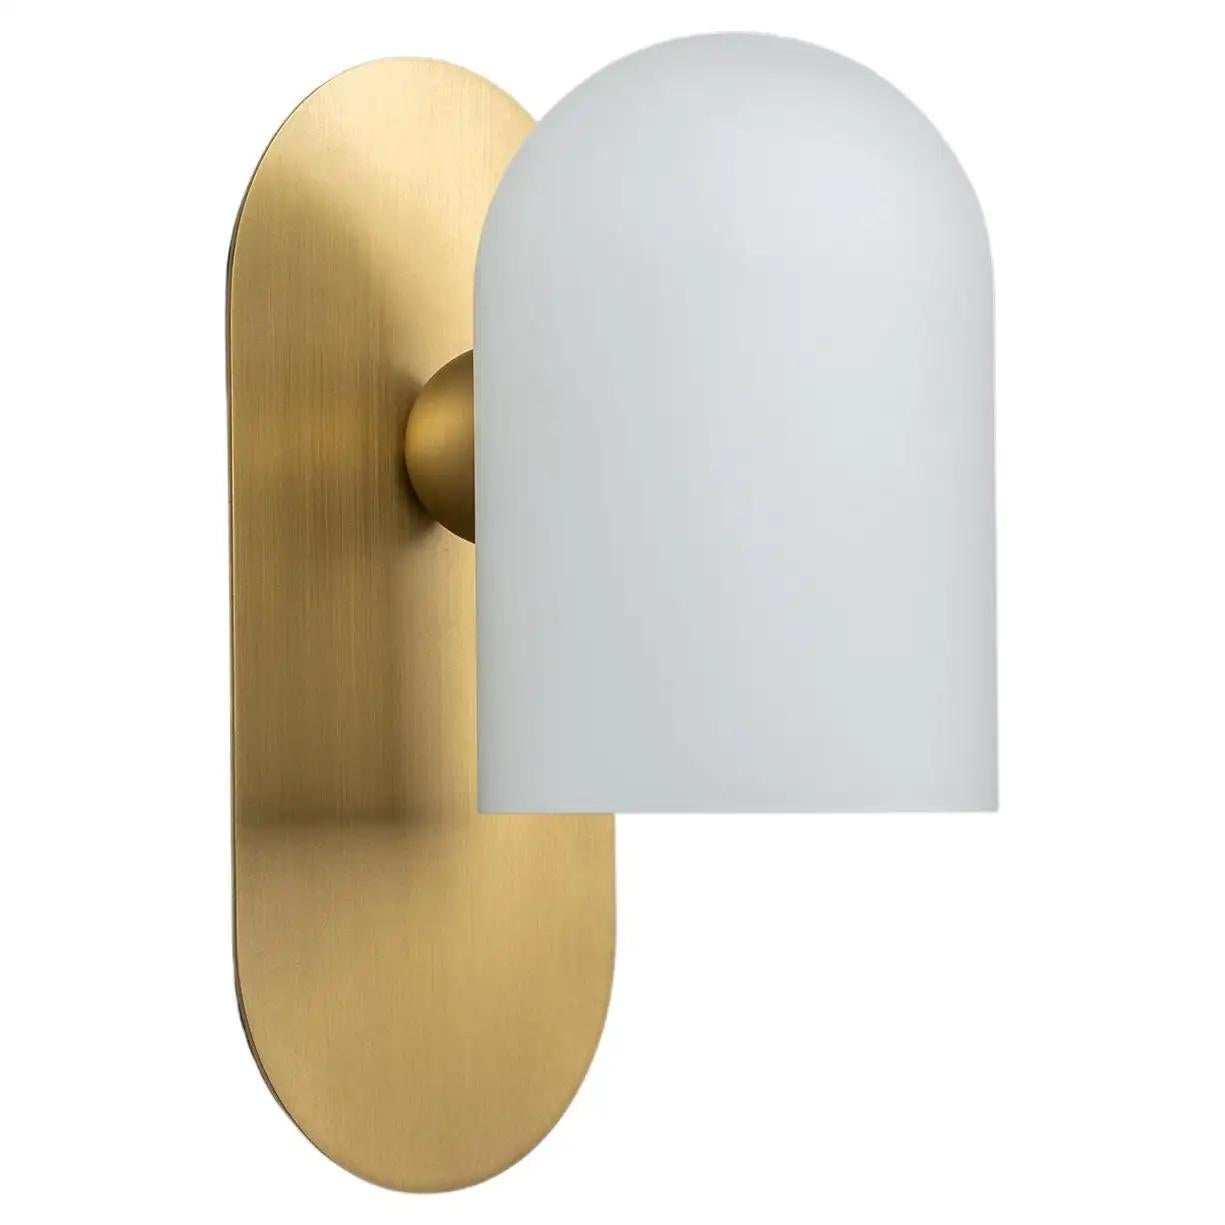 Brass small sconce by Schwung.
Dimensions: W 10.5 x D 14 x H 23 cm.
Materials: brass, frosted glass.

Finishes available: black gunmetal, polished nickel, brass.


Schwung is a German word, and loosely defined, means energy or momentumm of a